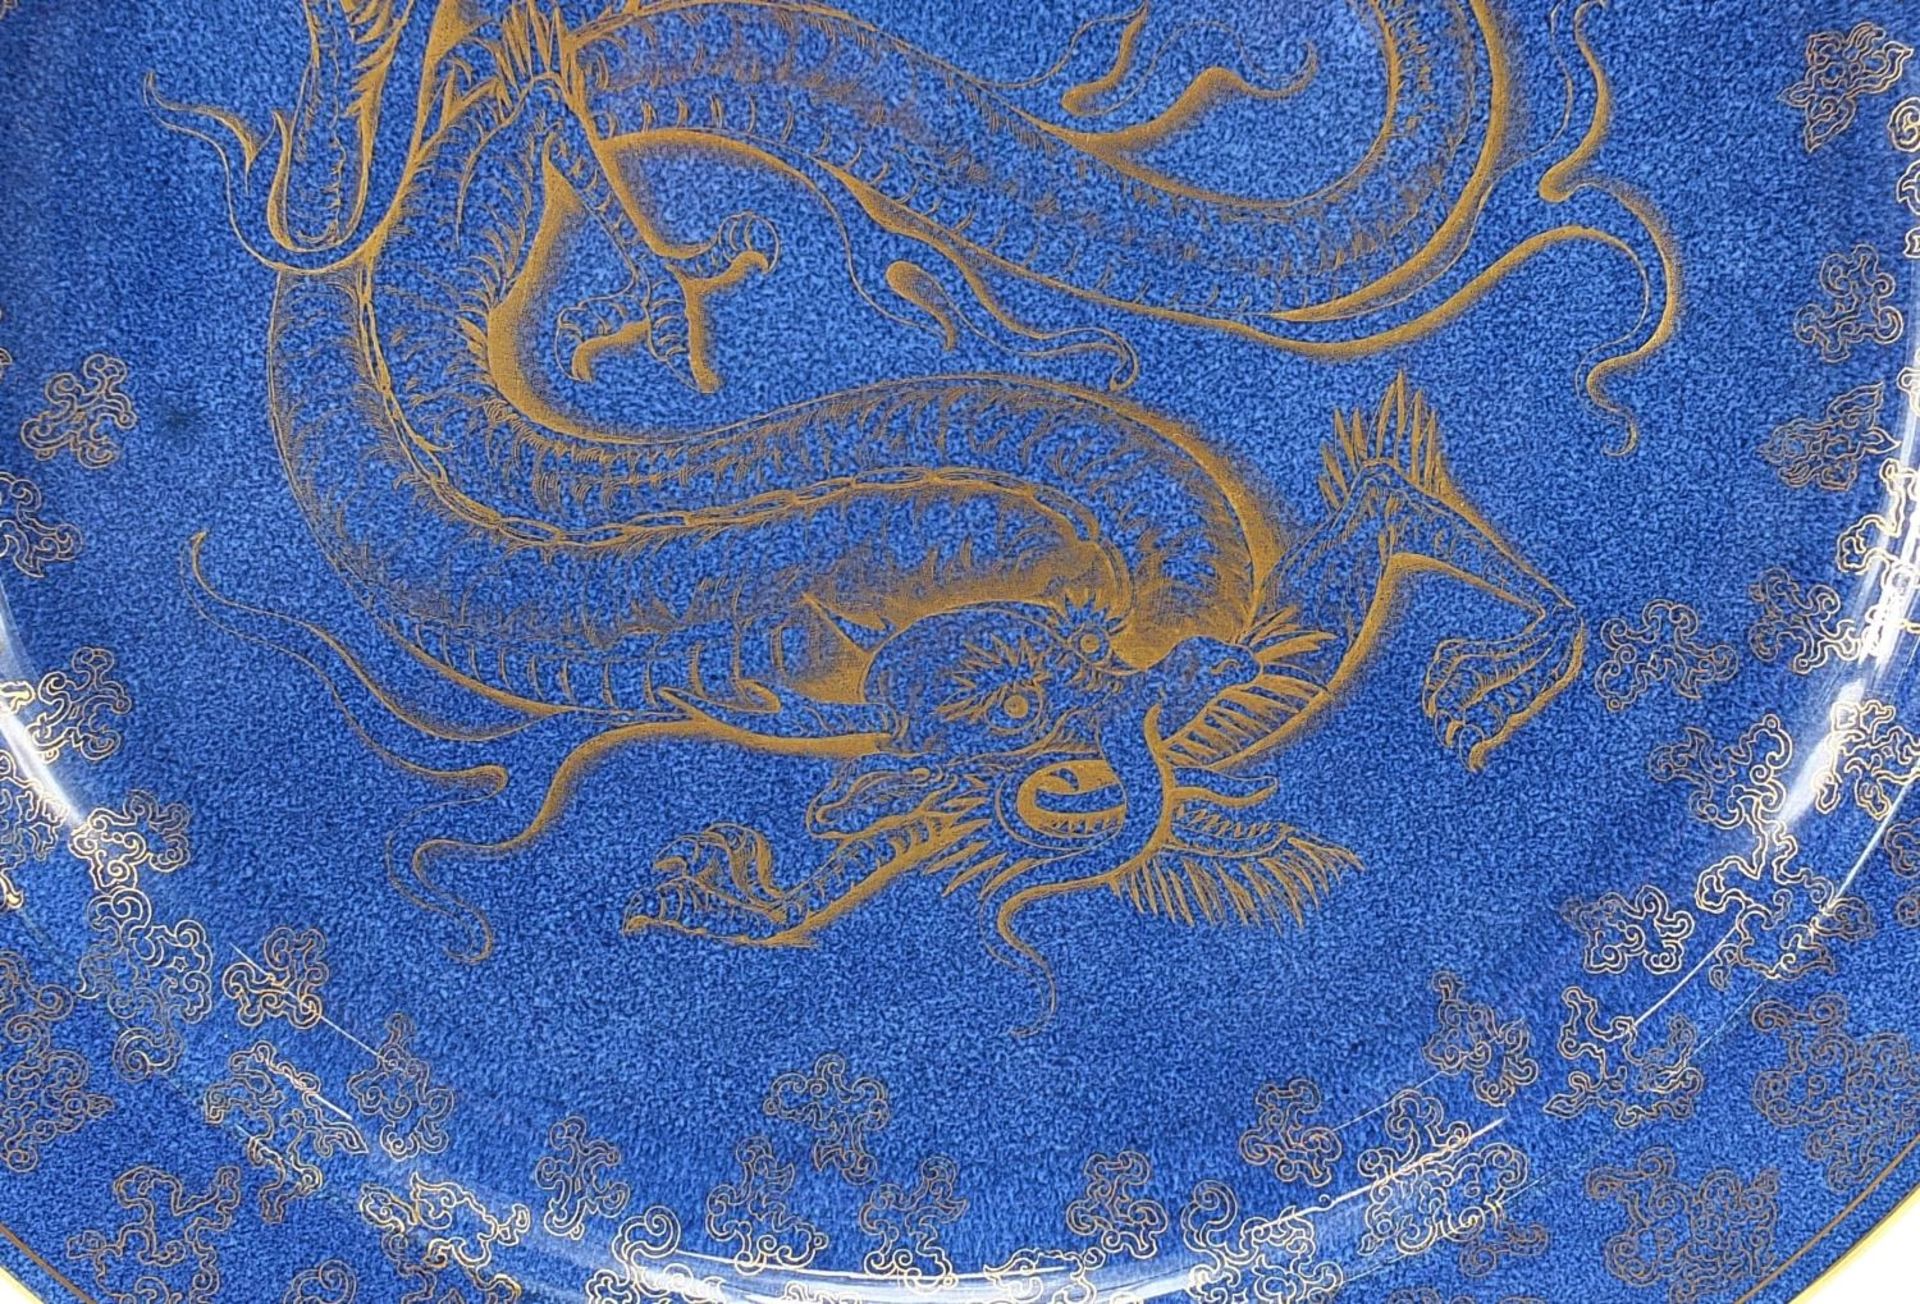 Wedgwood lustre charger hand painted with dragons, 38cm in diameter - Image 2 of 4